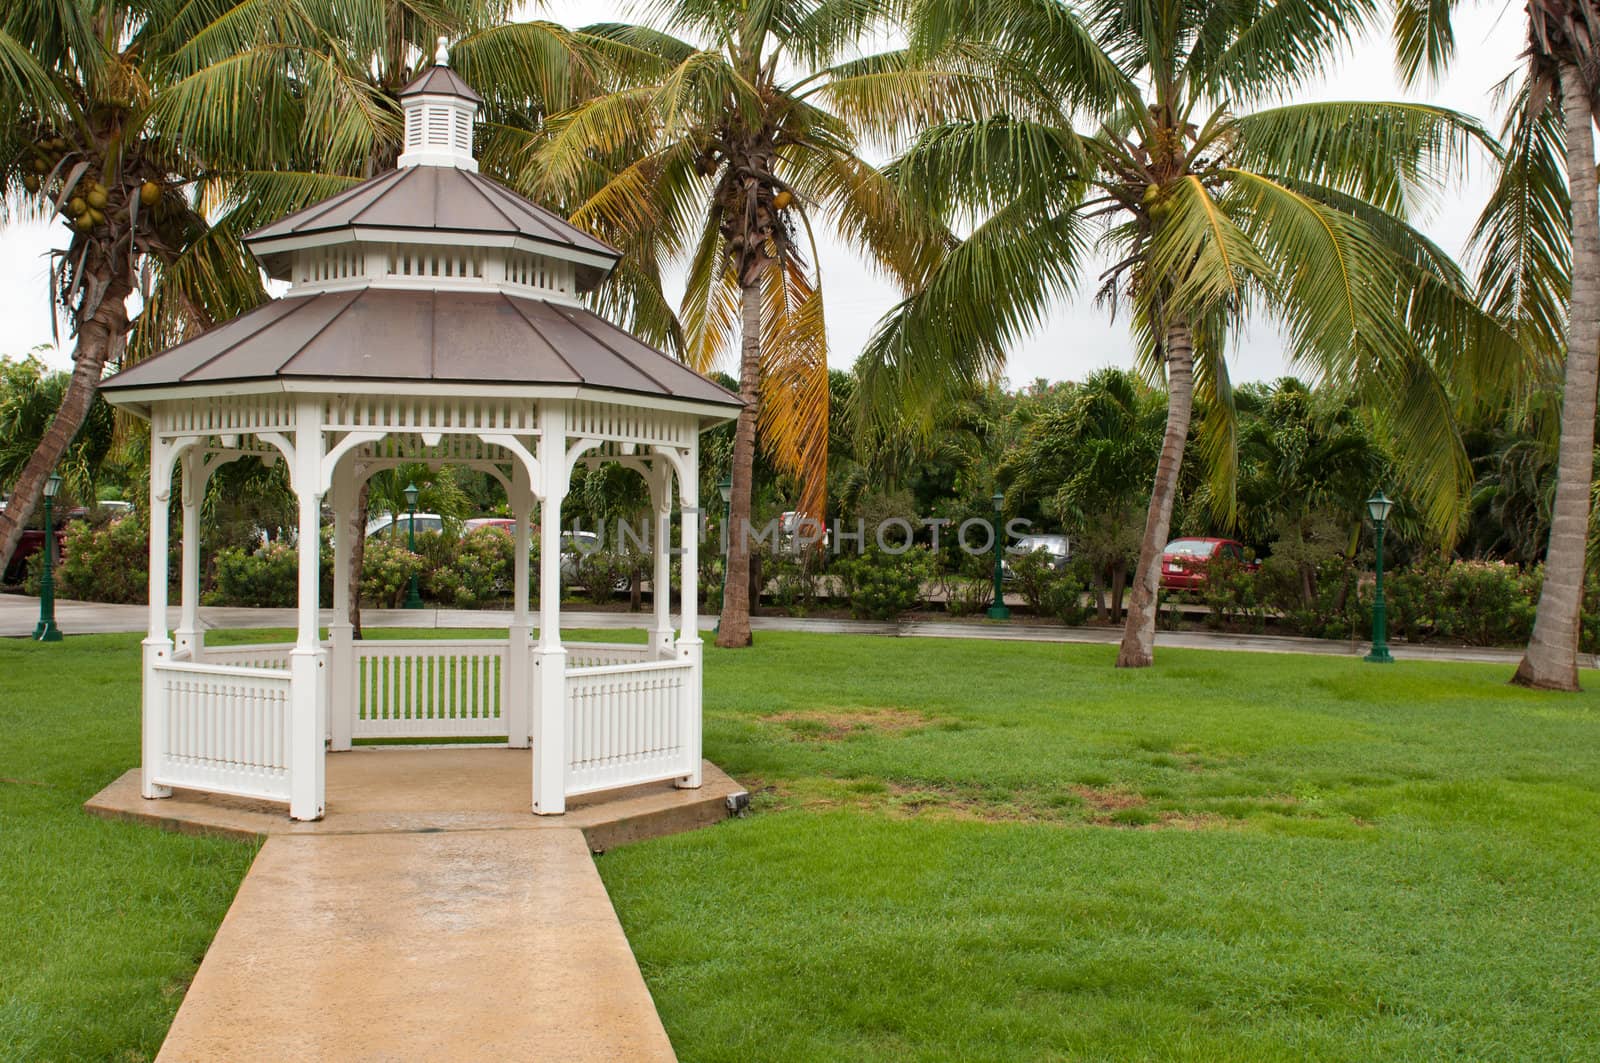 pathway to grgeous white gazebo after a tropical storm (outdoor setting)